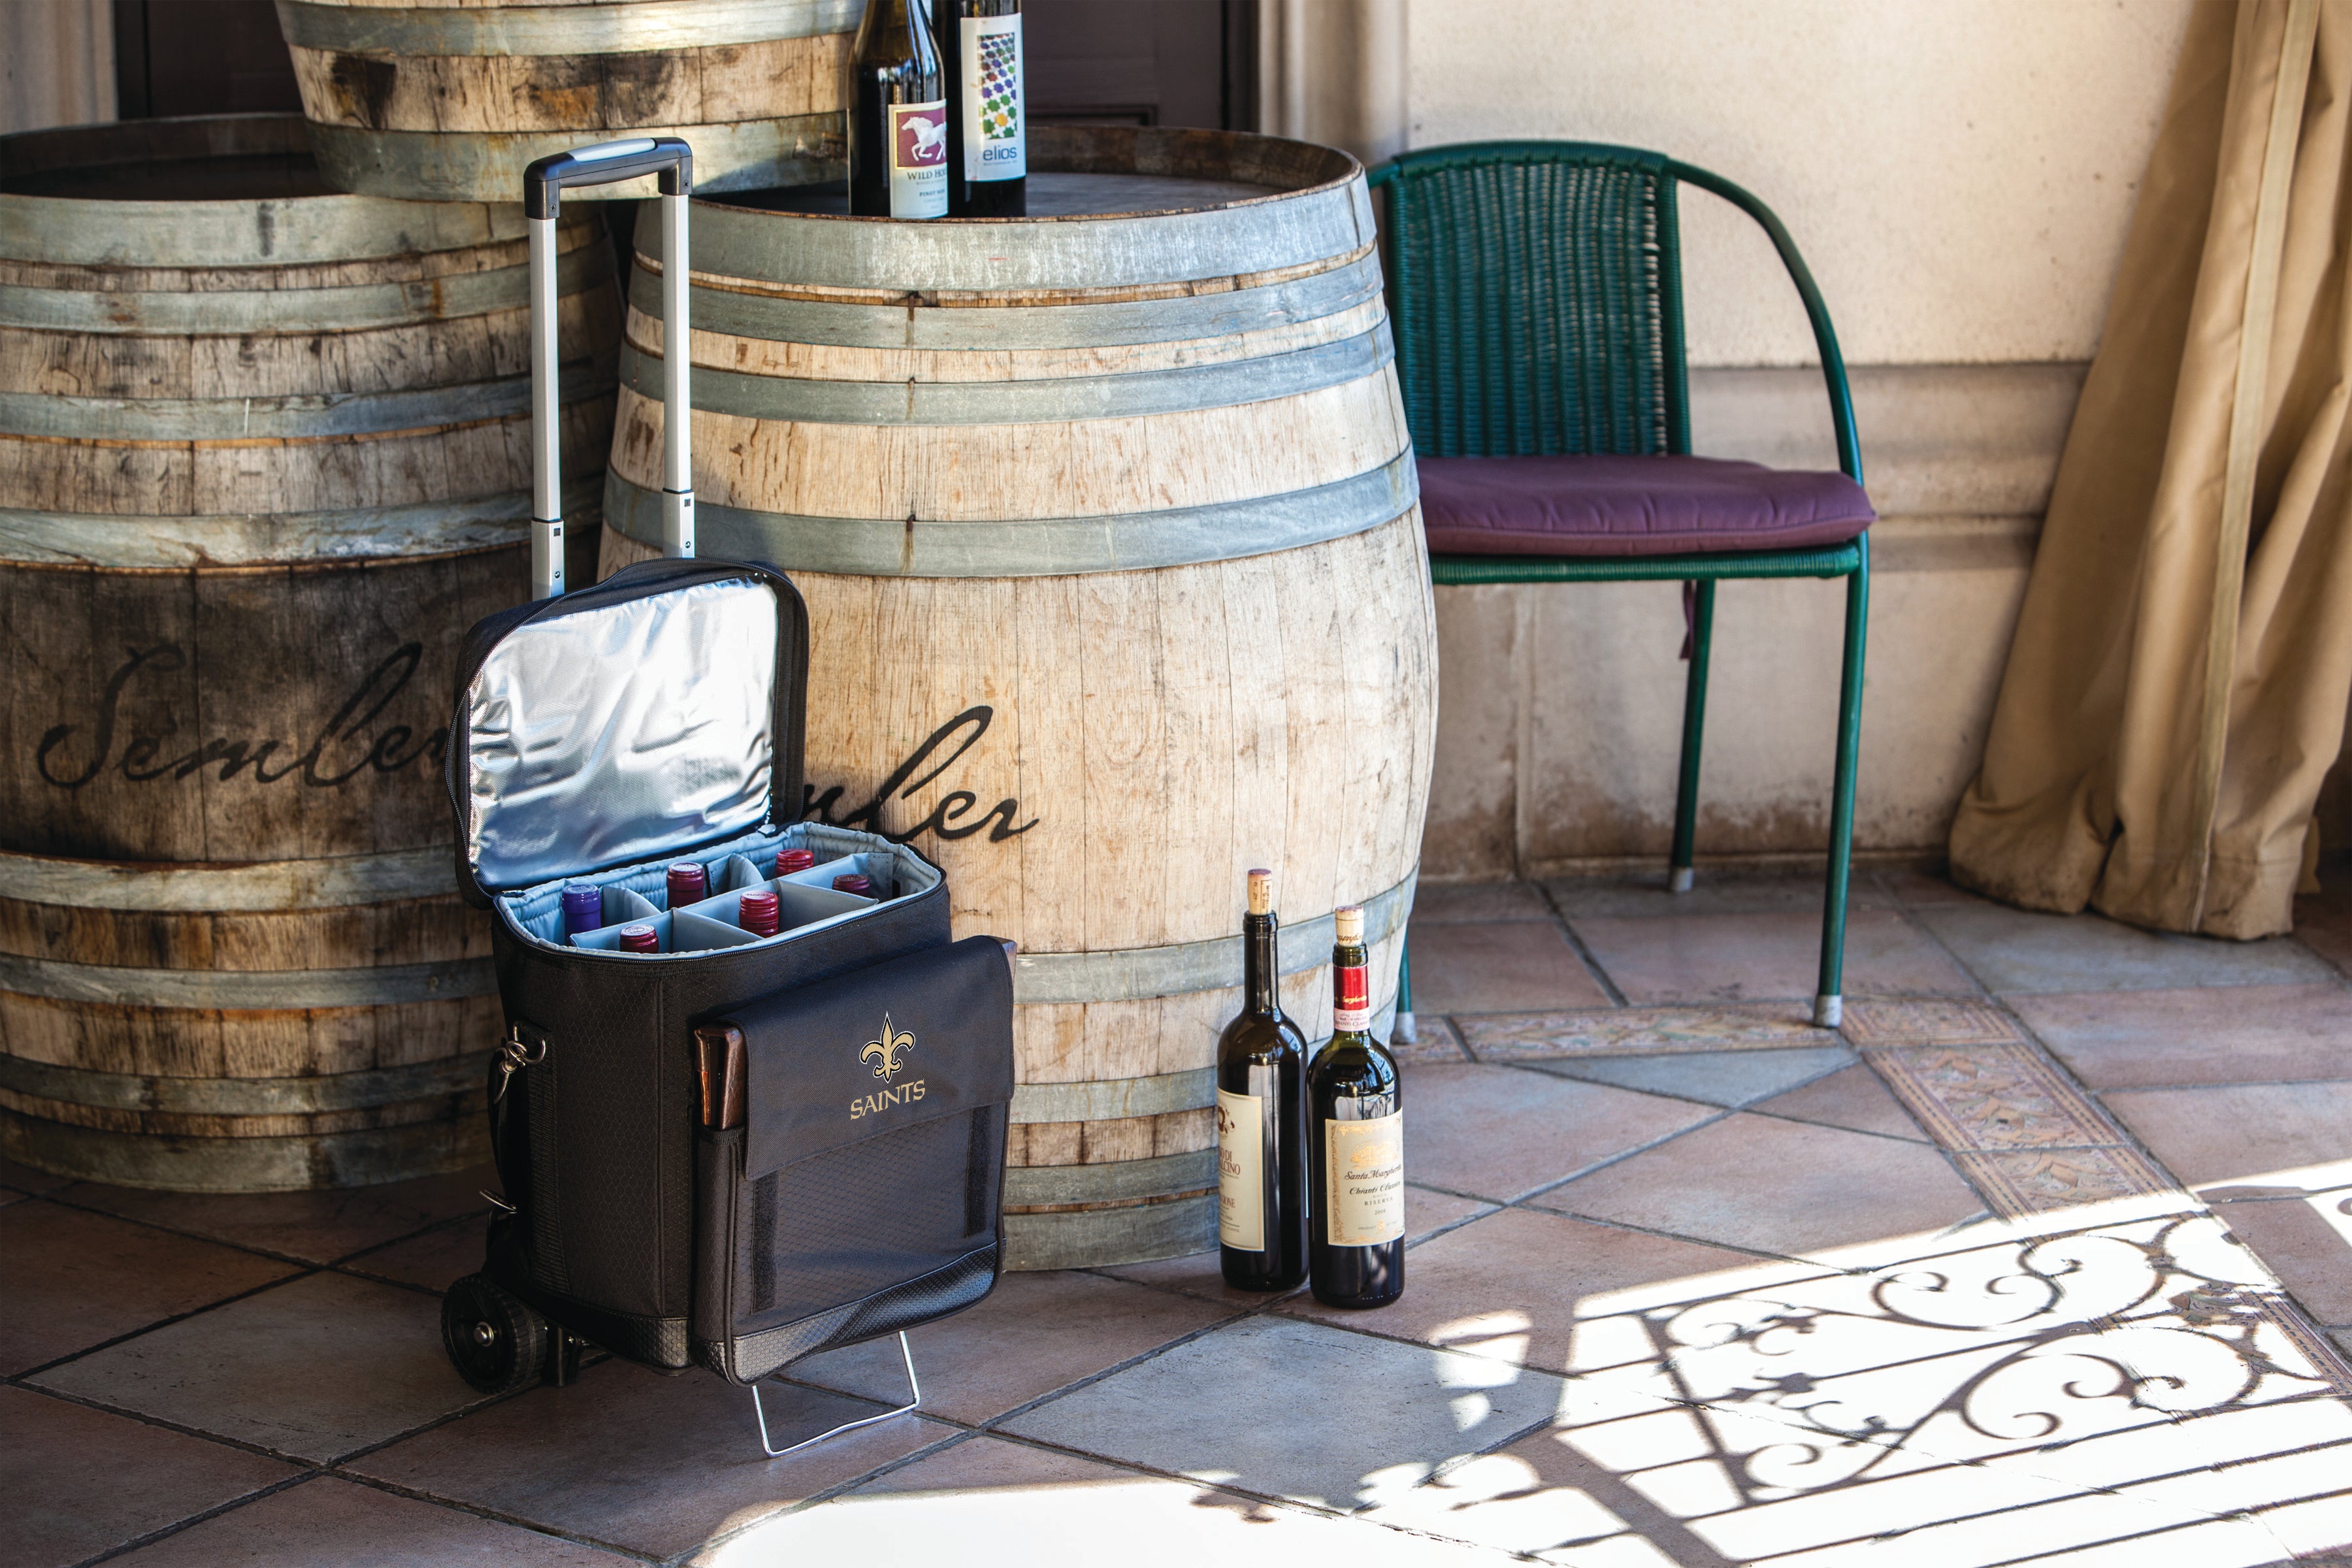 New Orleans Saints - Cellar 6-Bottle Wine Carrier & Cooler Tote with Trolley